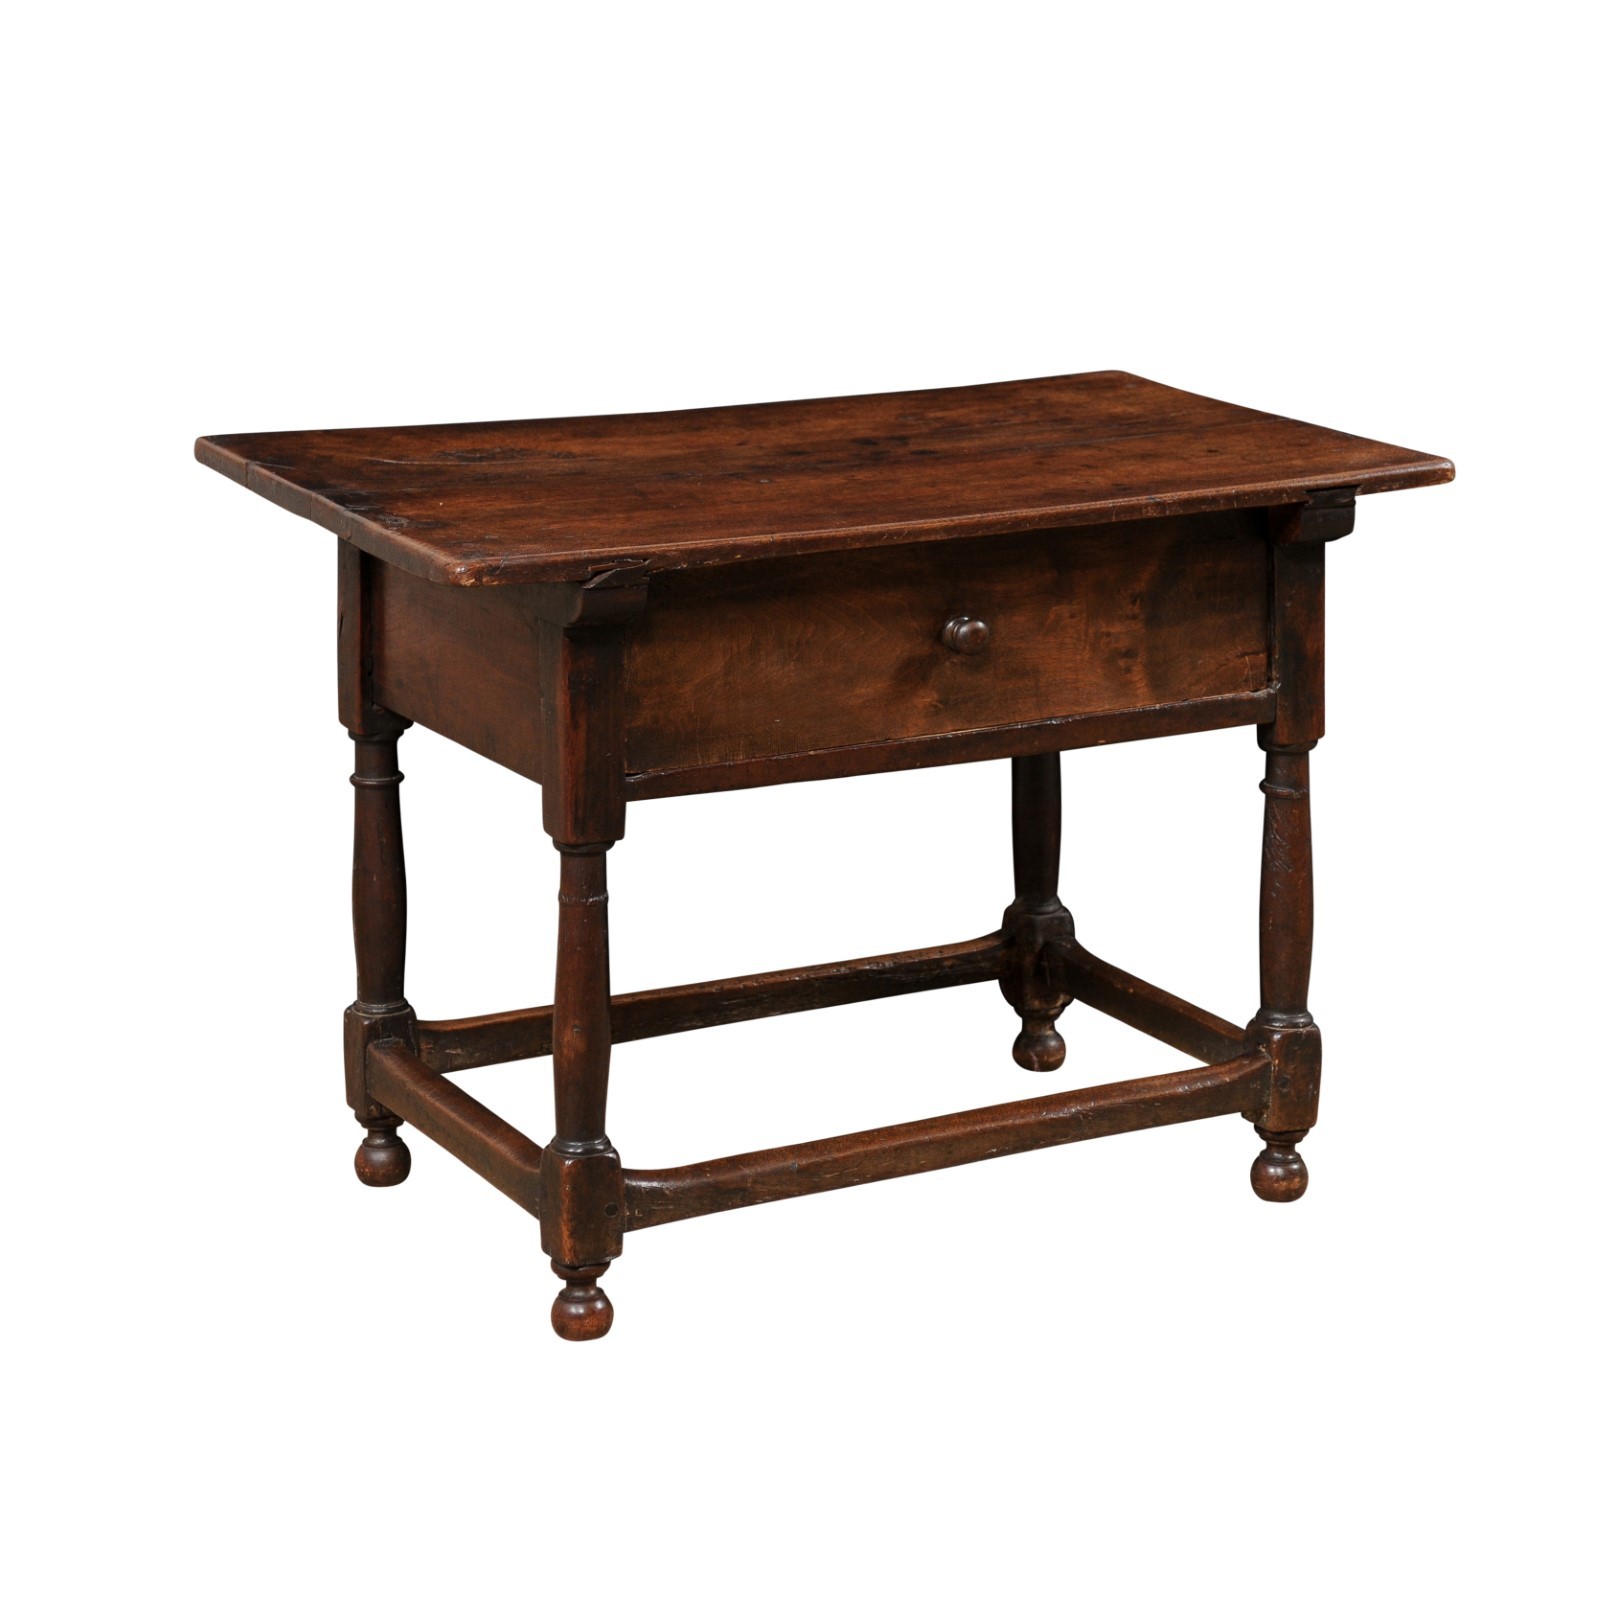 18th C. Italian Occasional Table w/ Drawer